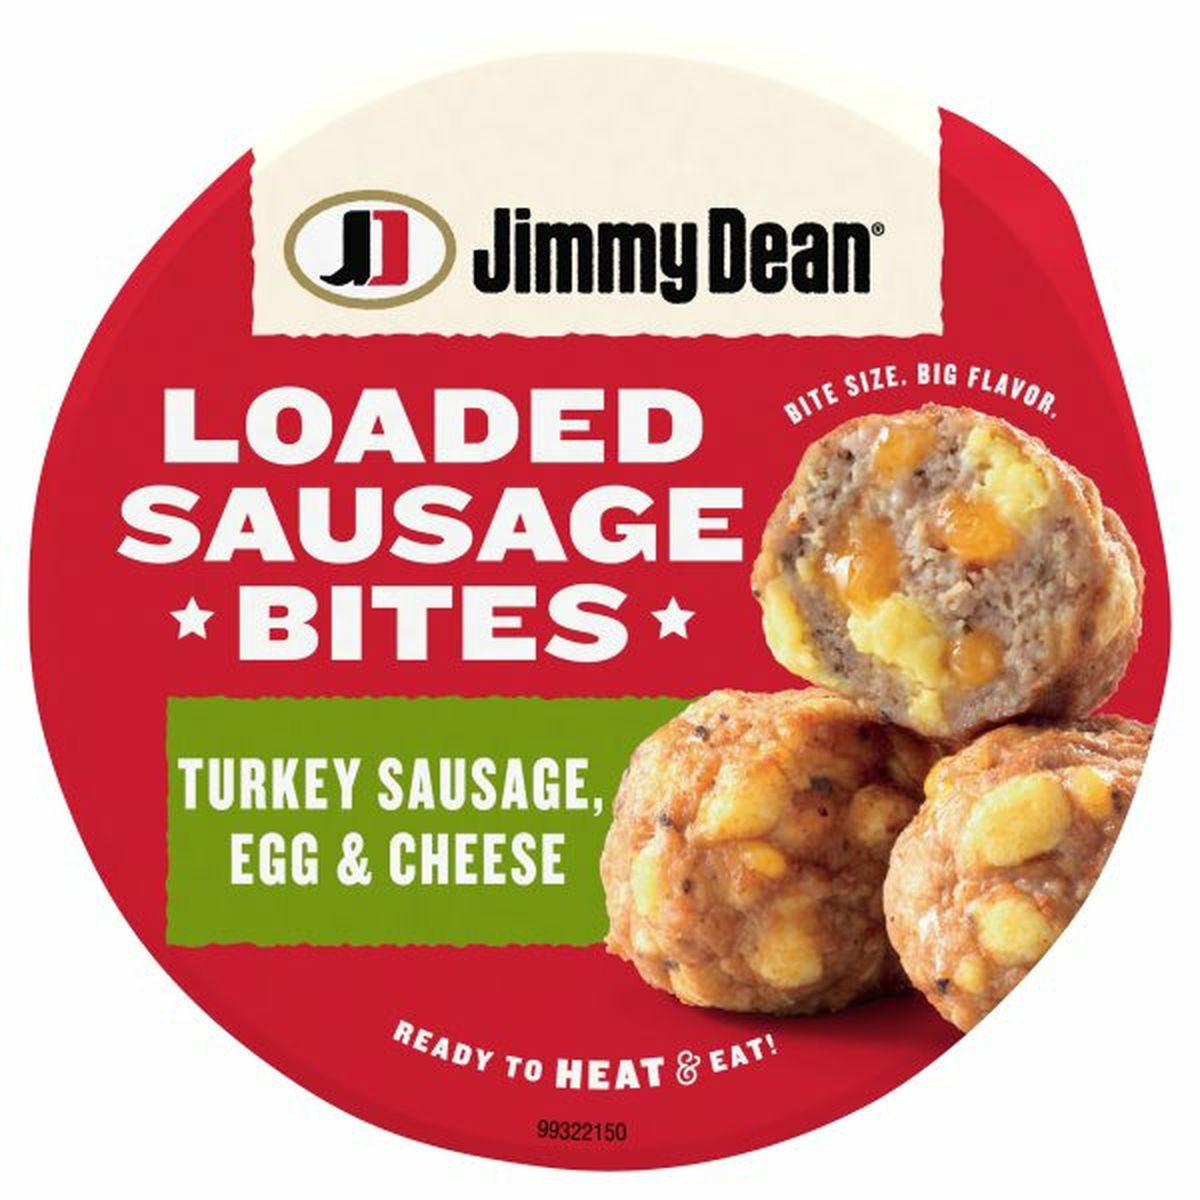 Calories in Jimmy Dean Turkey Sausage, Egg and Cheese Loaded Sausage Bites, 3.75 oz